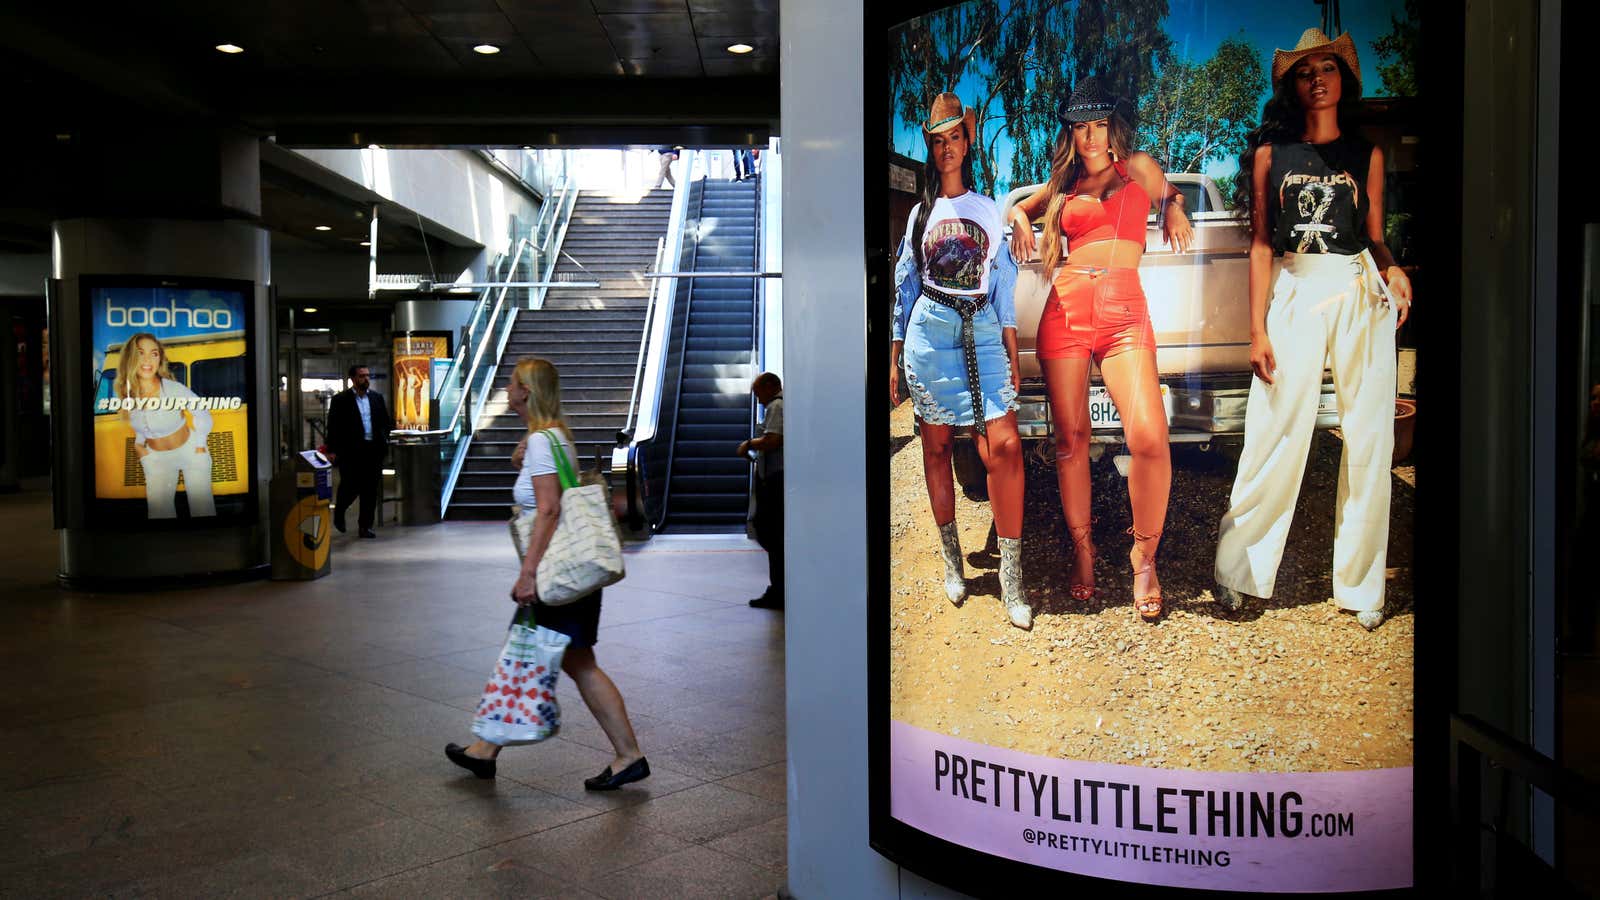 Boohoo, which owns “Pretty Little Things” and others, may be going shopping again.